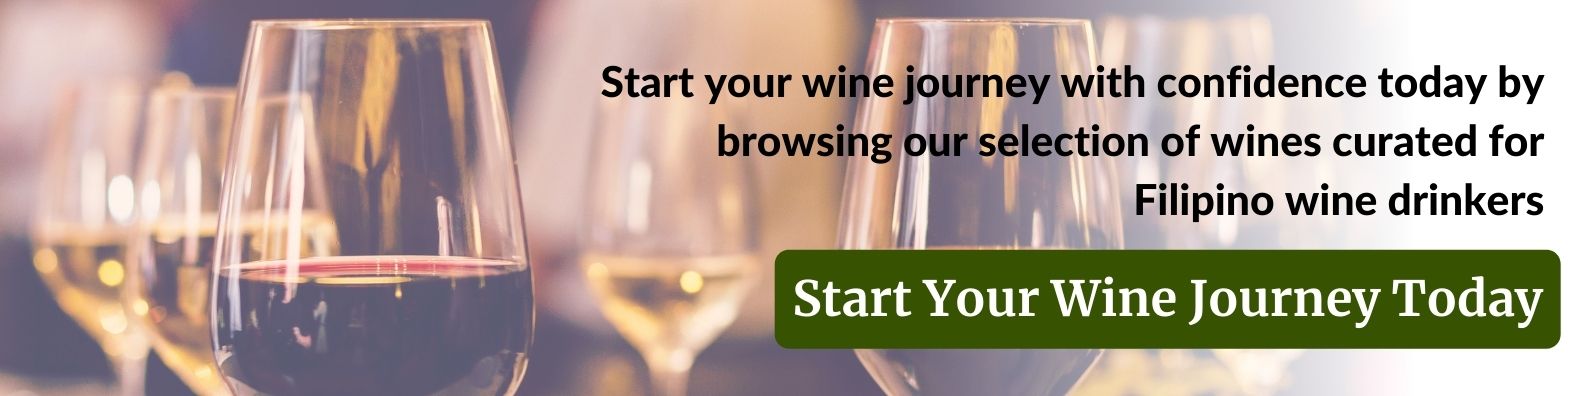 buy wine with confidence at best prices online in the philippines